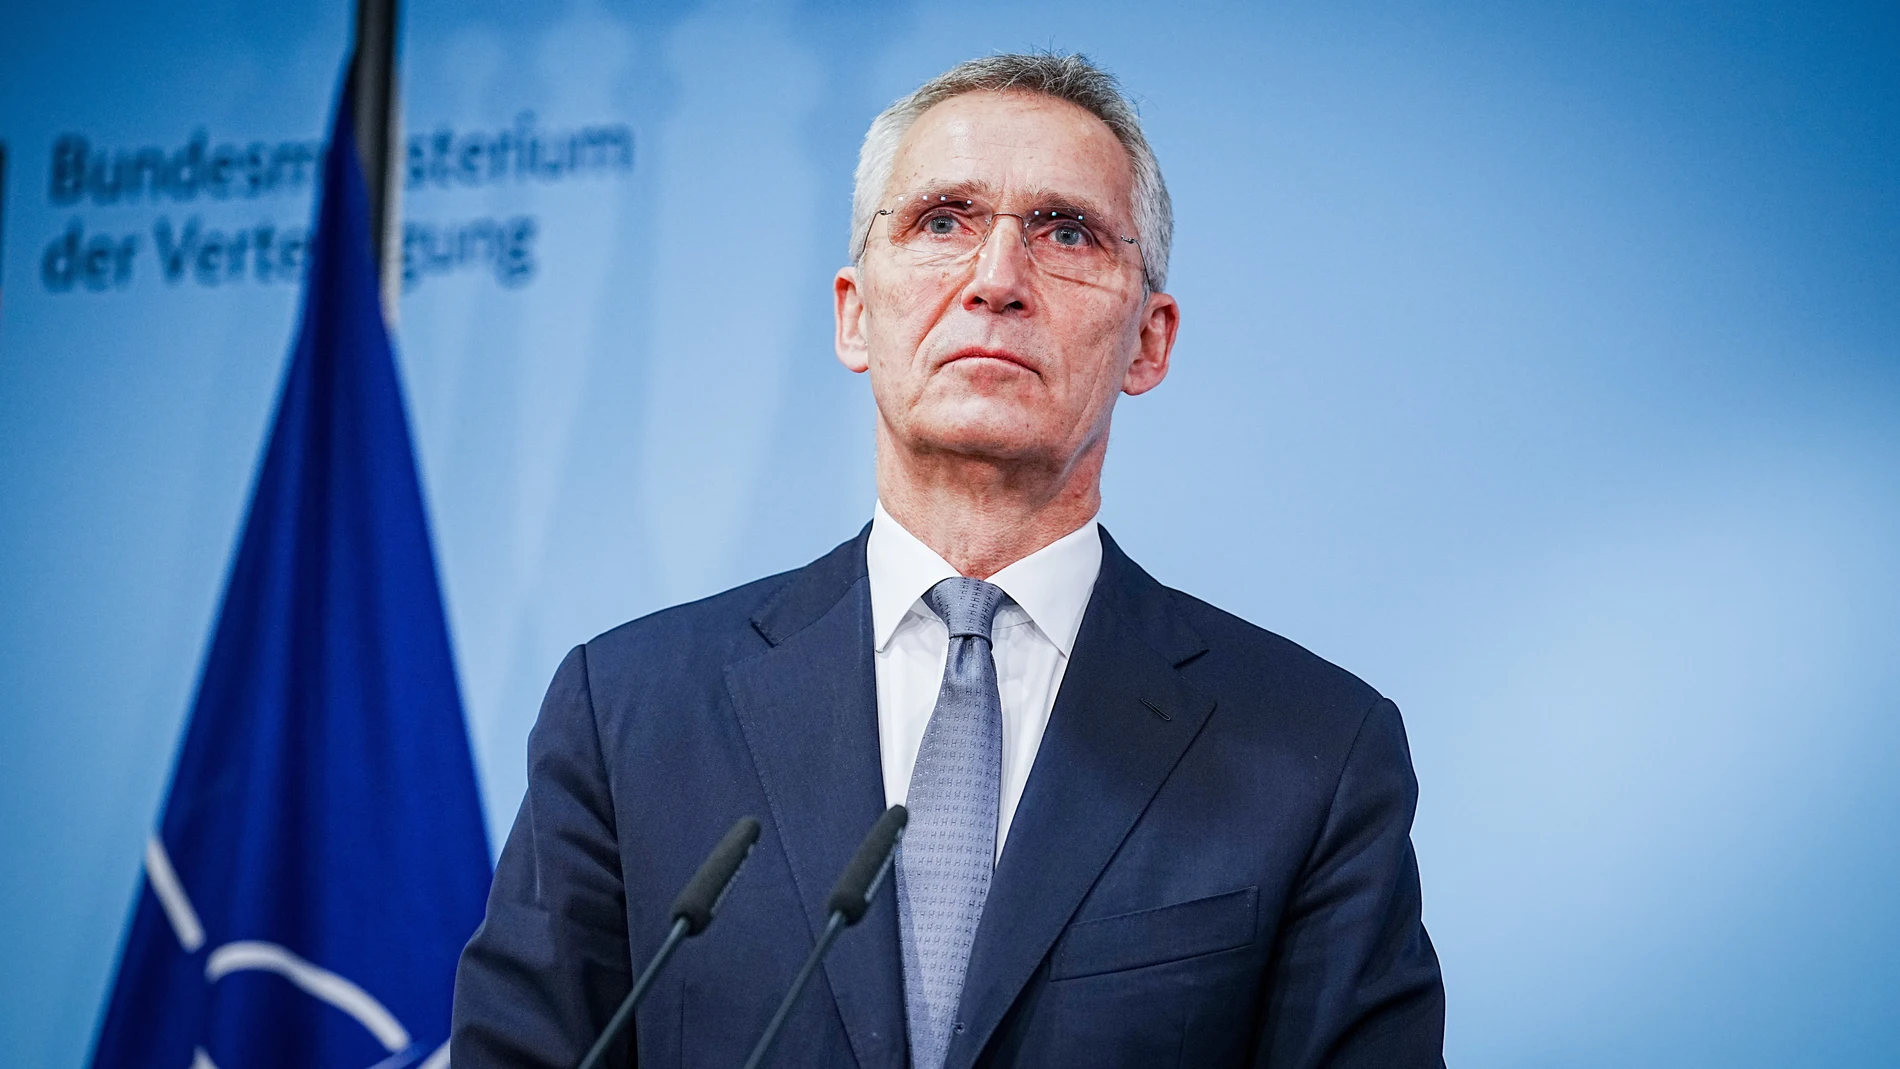 FILED - 24 January 2023, Berlin: Jens Stoltenberg, NATO Secretary General, speaks during a press conference at the German Ministry of Defence. NATO member states have extended the term of Secretary General Jens Stoltenberg until October 1, 2024, the alliance chief tweeted on Tuesday. Photo: Kay Nietfeld/dpa (Foto de ARCHIVO)24/01/2023 ONLY FOR USE IN SPAIN